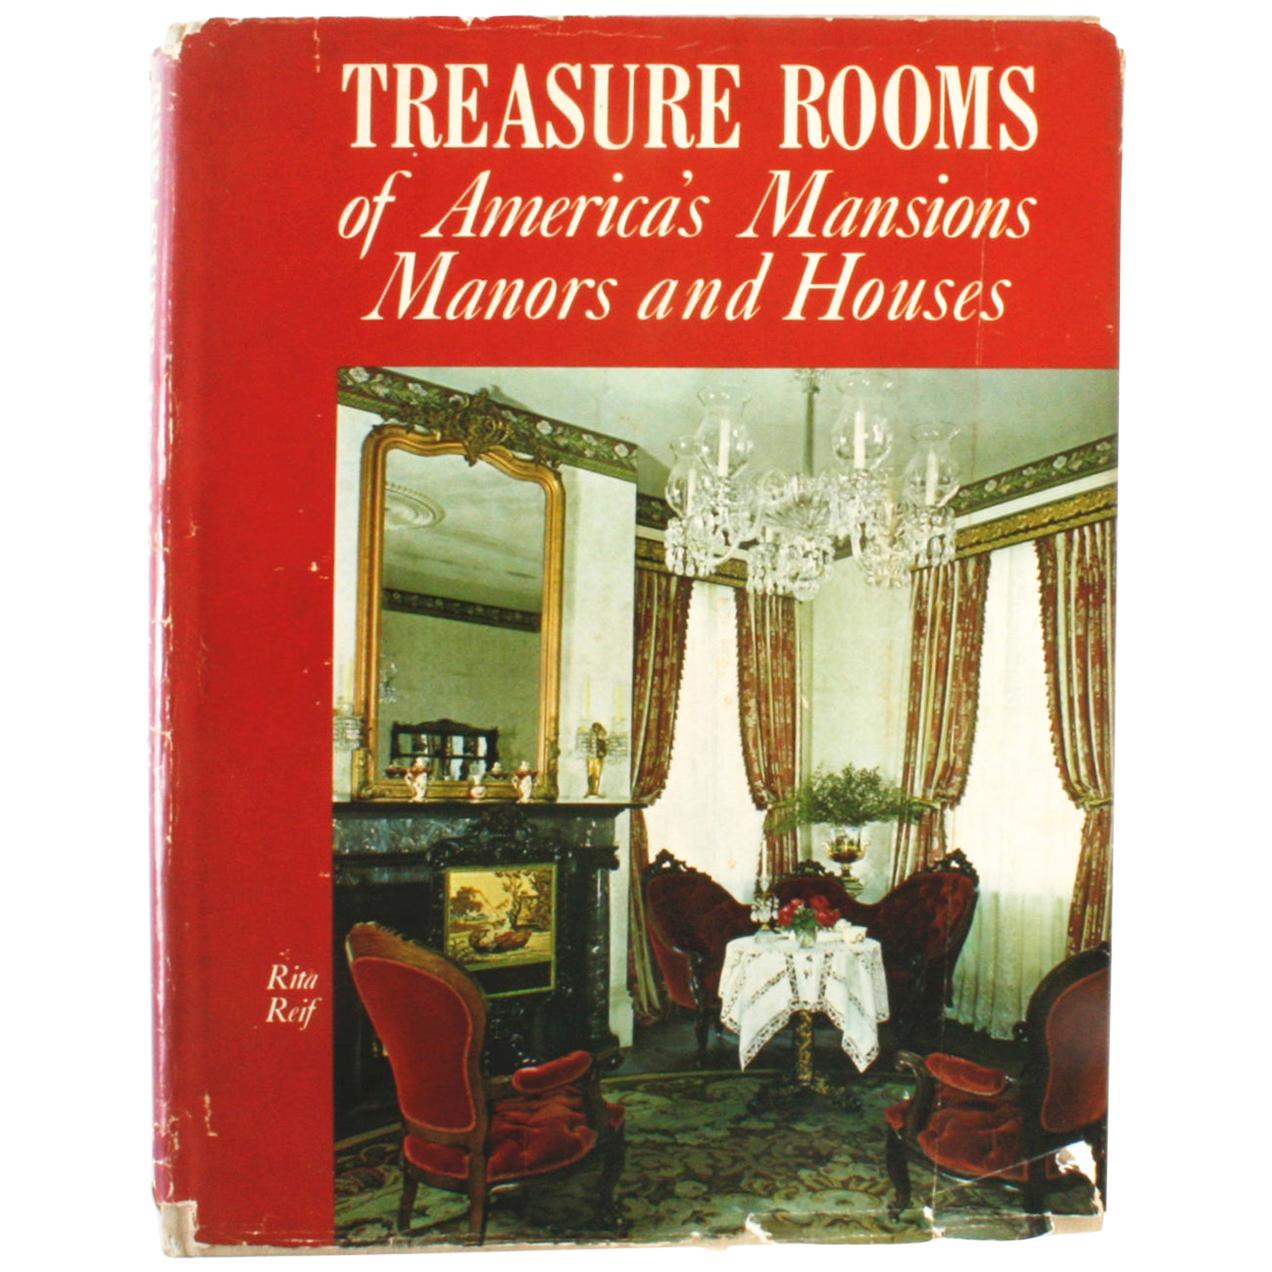 Treasure Rooms of America's Mansions Manors and Houses by Rita Reif, 1st Ed For Sale